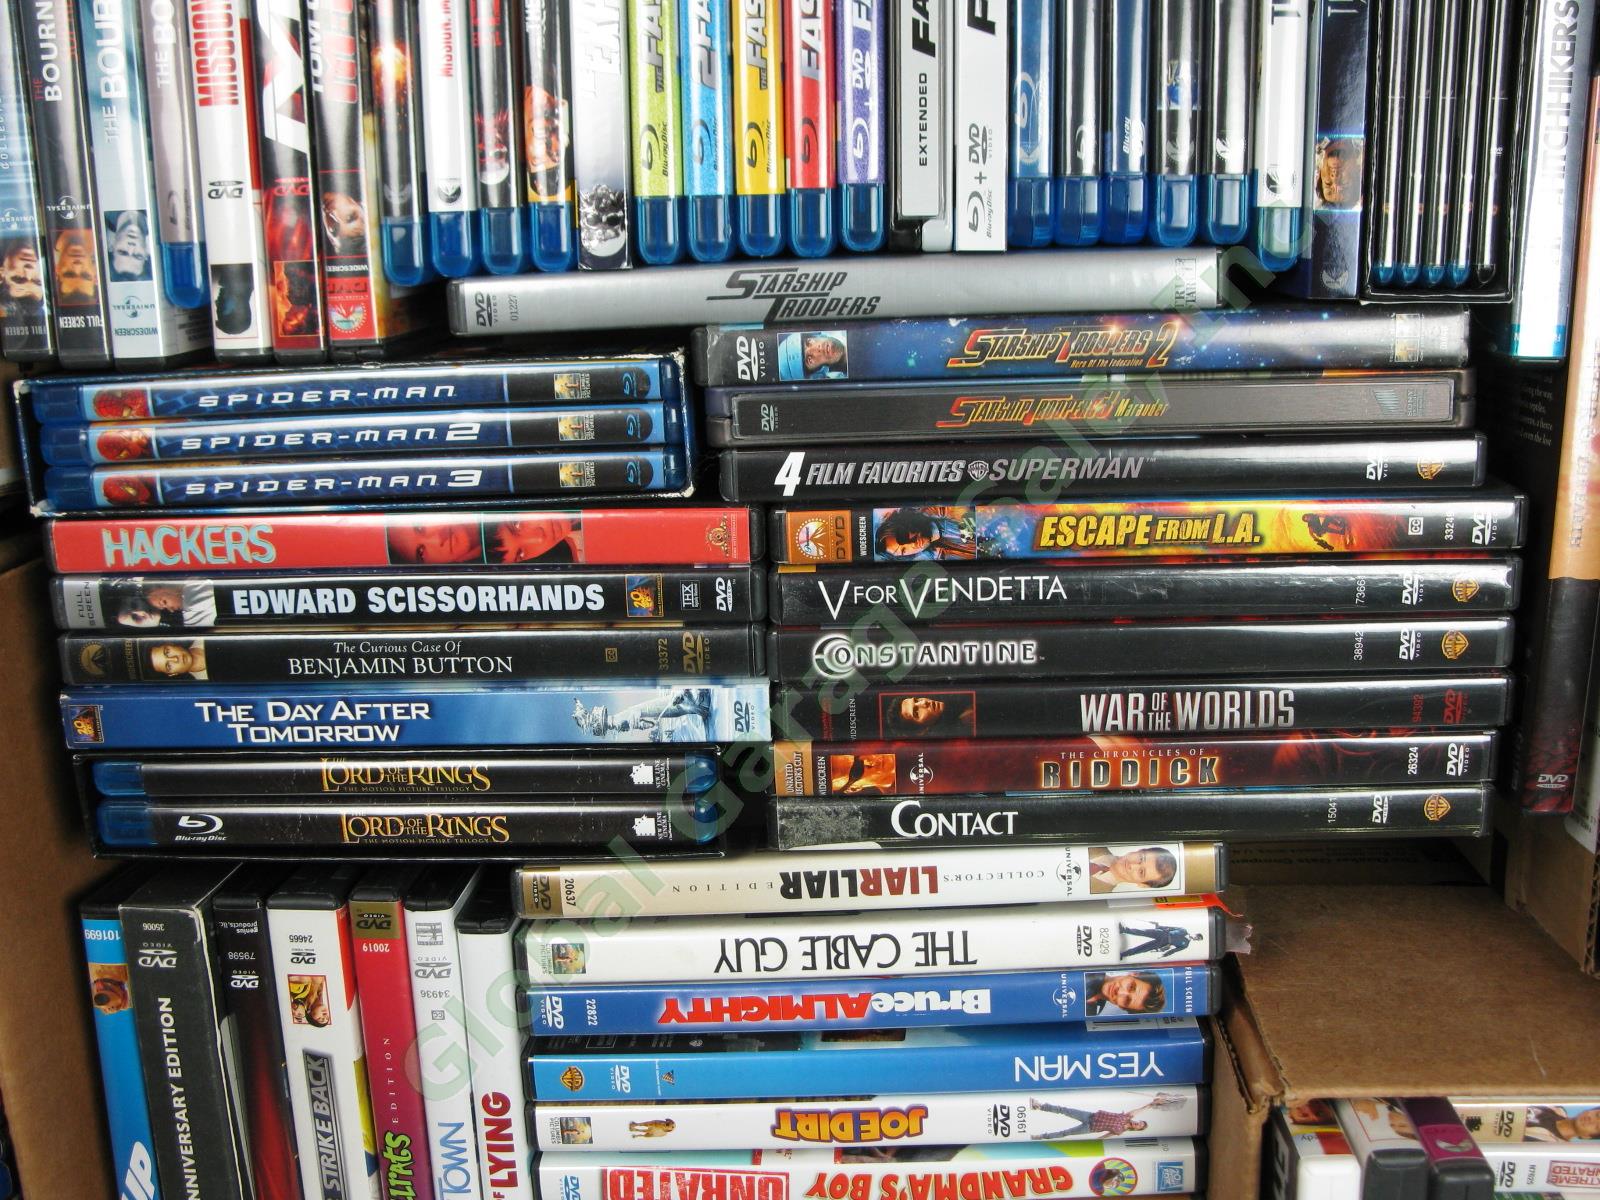 HUGE Mixed Assorted Blu-Ray DVD Collection Movies TV Series Seasons Box Sets +++ 5